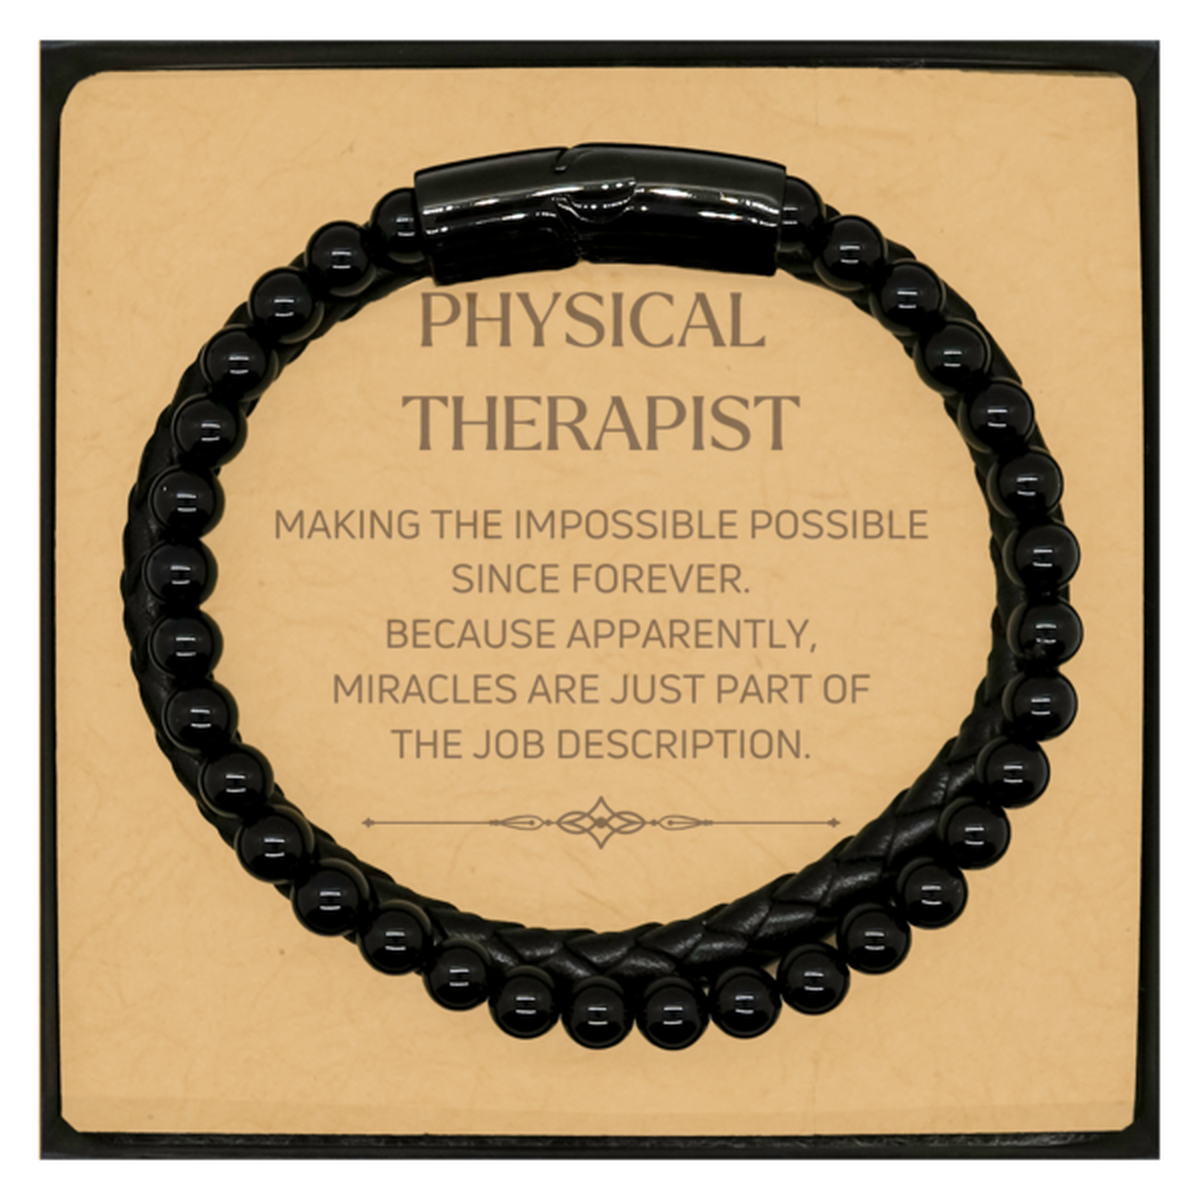 Funny Physical Therapist Gifts, Miracles are just part of the job description, Inspirational Birthday Christmas Stone Leather Bracelets For Physical Therapist, Men, Women, Coworkers, Friends, Boss